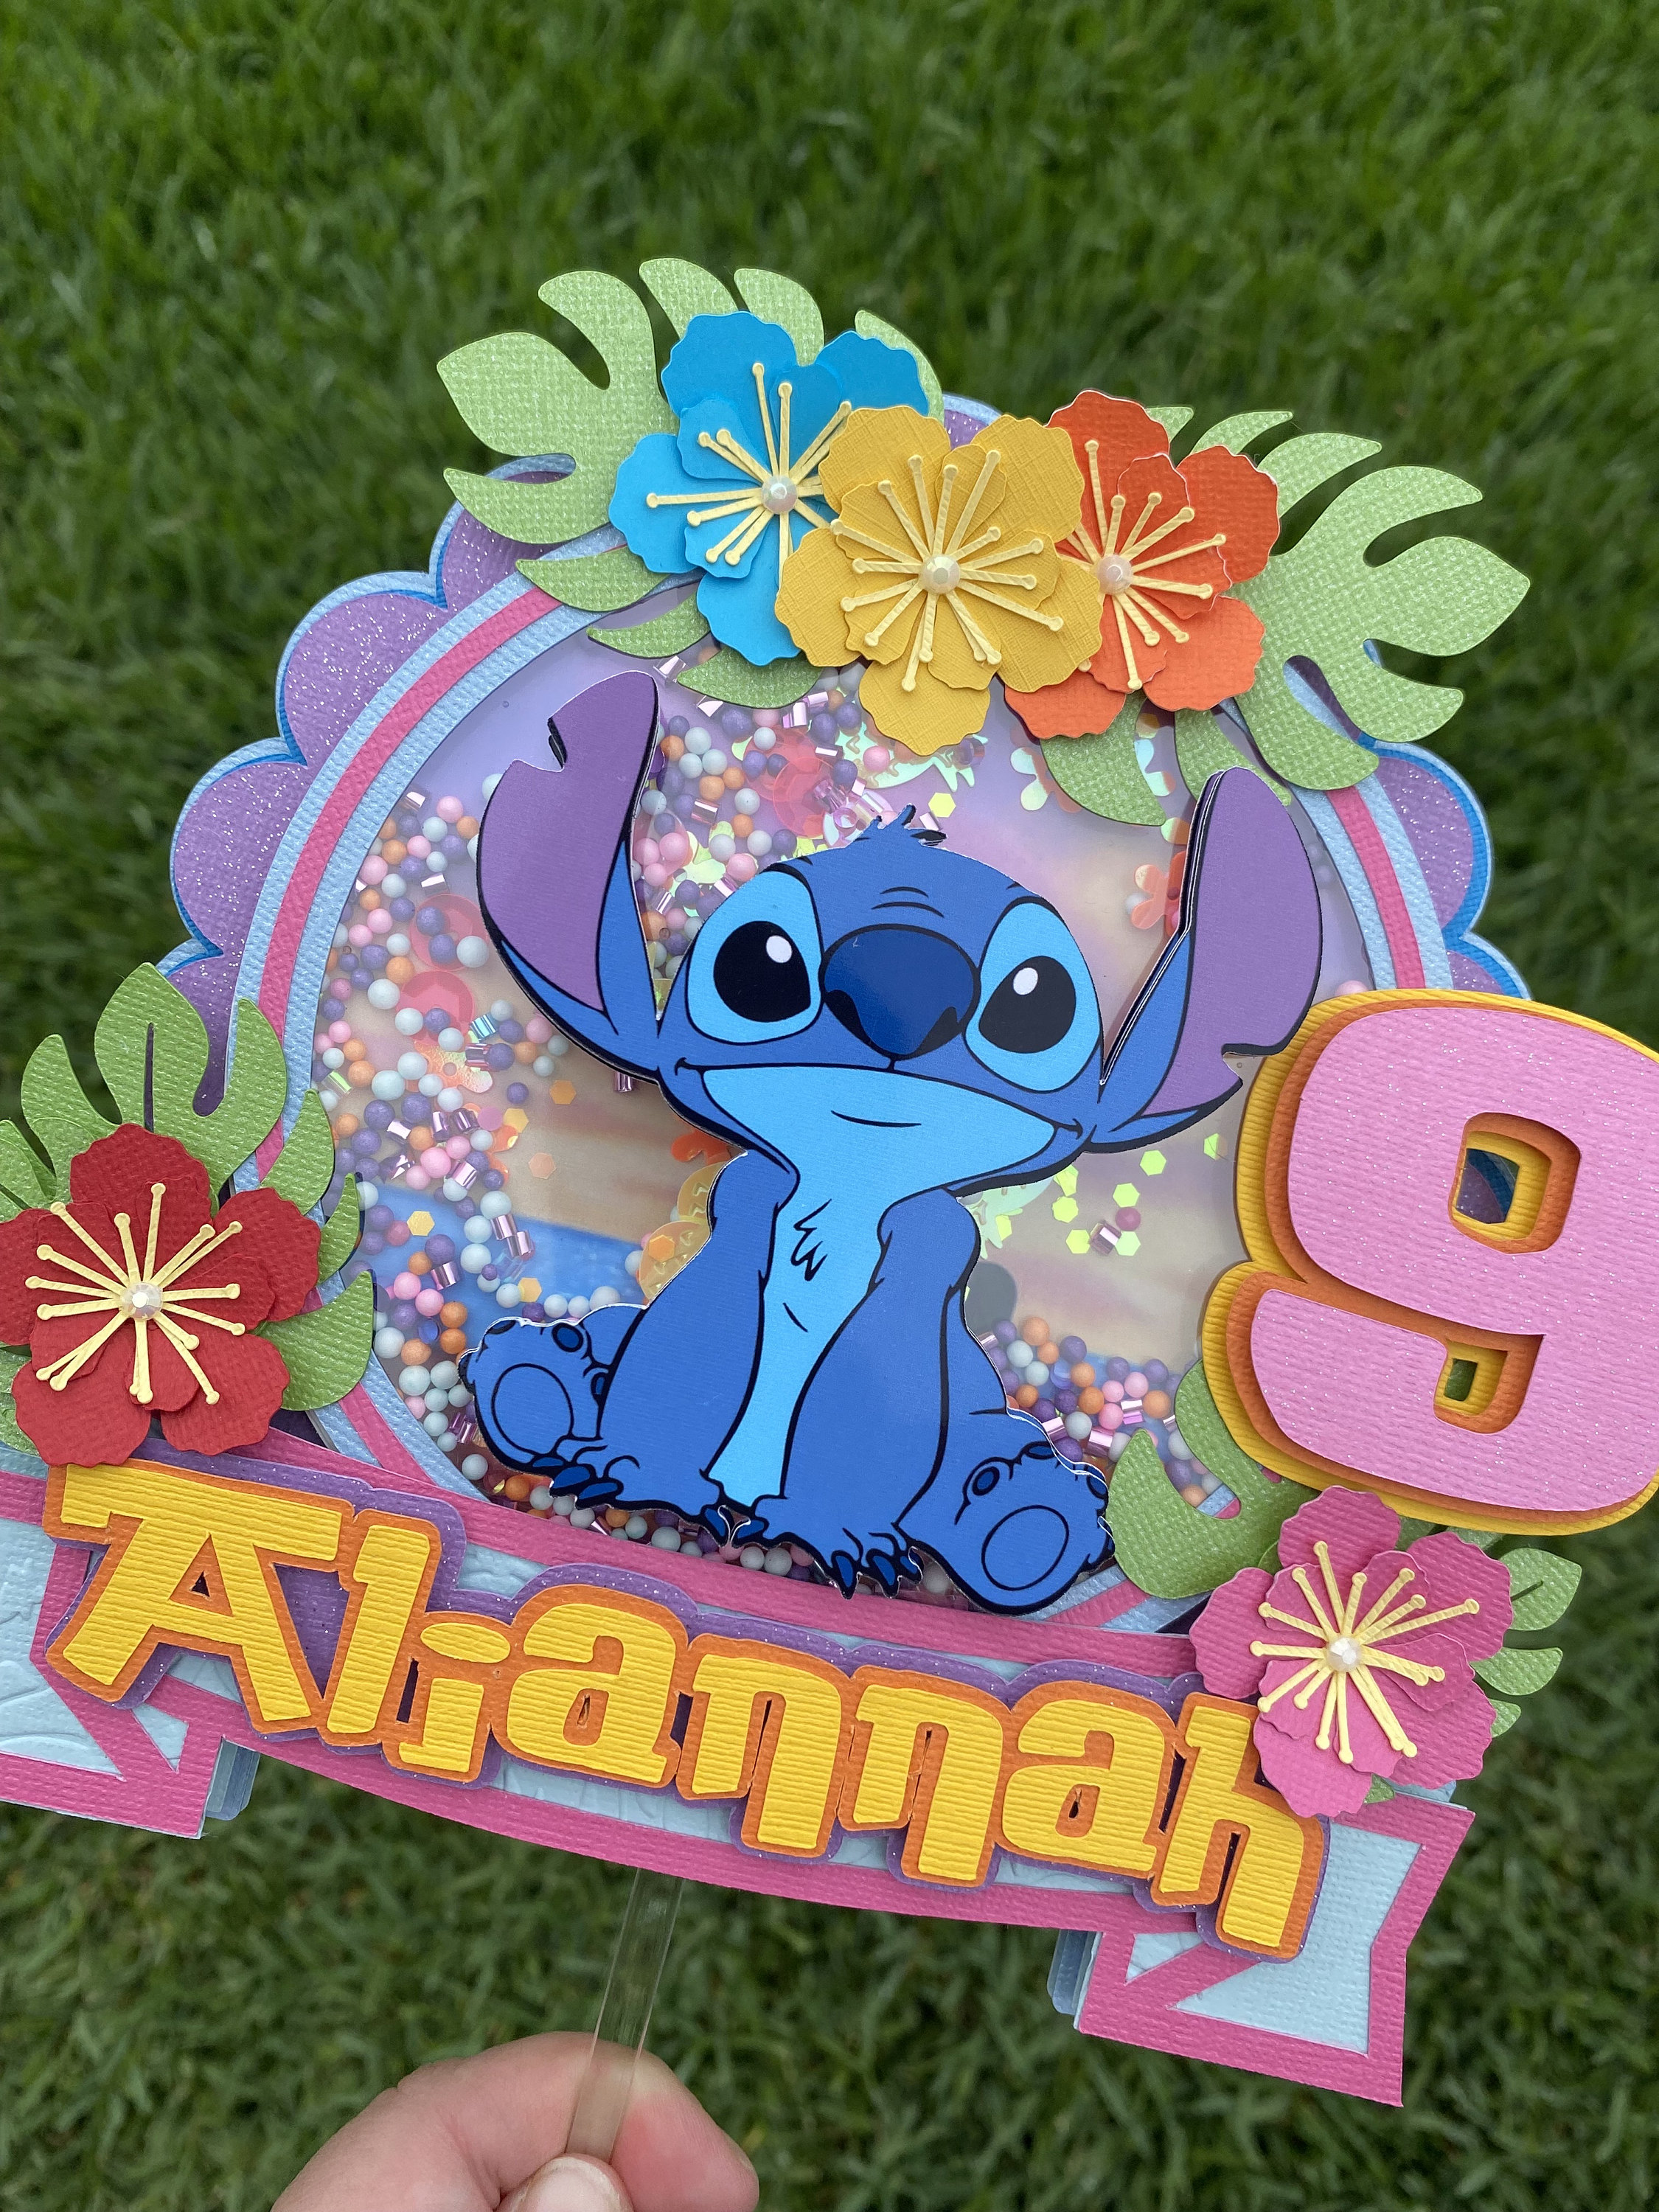 Stitch Cake Topper, Stitch Birthday Supplies, Stitch Party Decor, Stitch  Cupcakes Toppers, Stitch 3D Letters, Party Decorations 